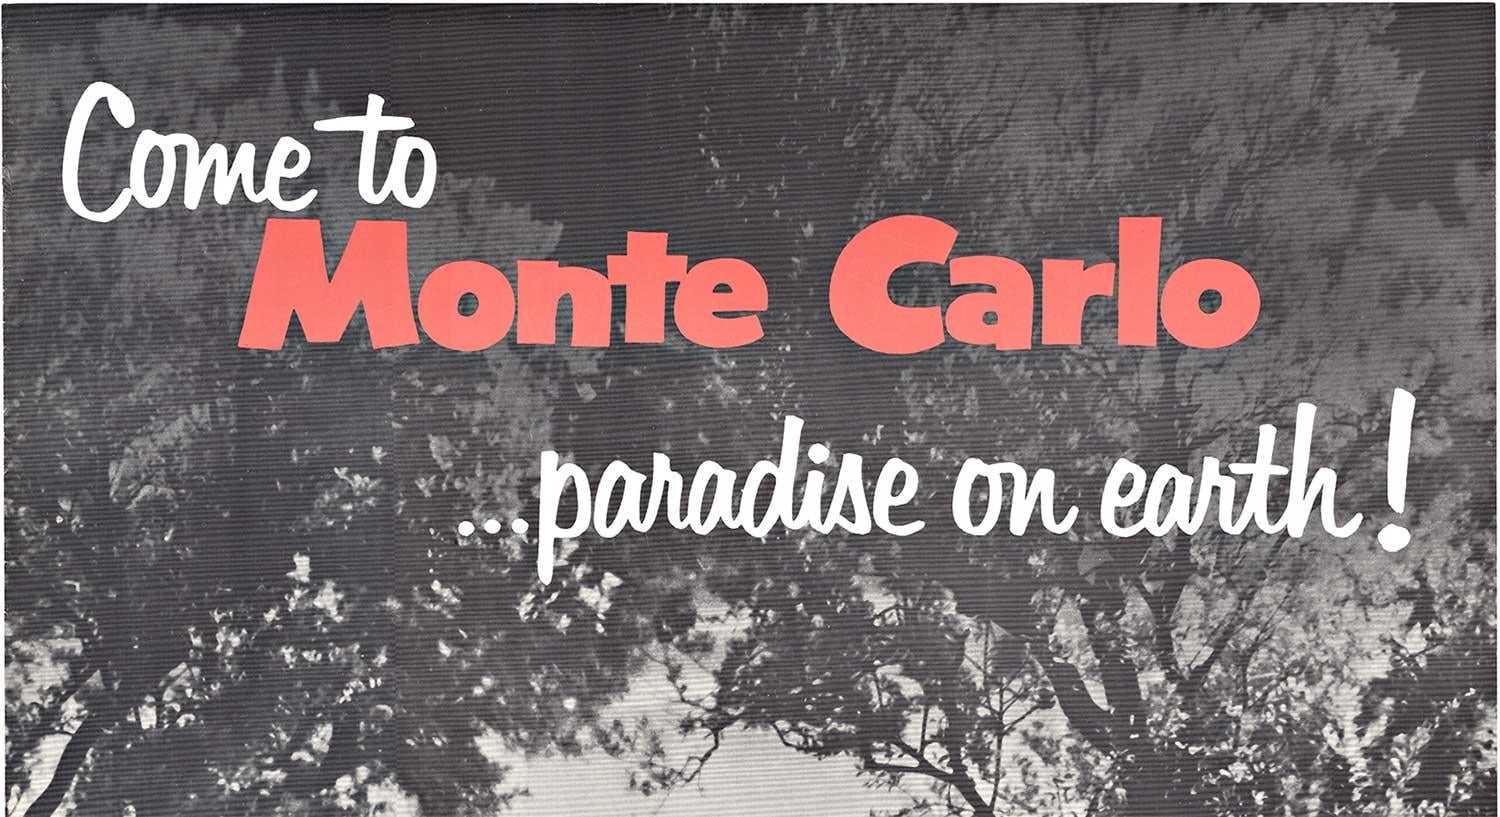 Original 'Come to Monte Carlo, Monaco' vintage poster.   Paradise on Earth! - Print by Unknown